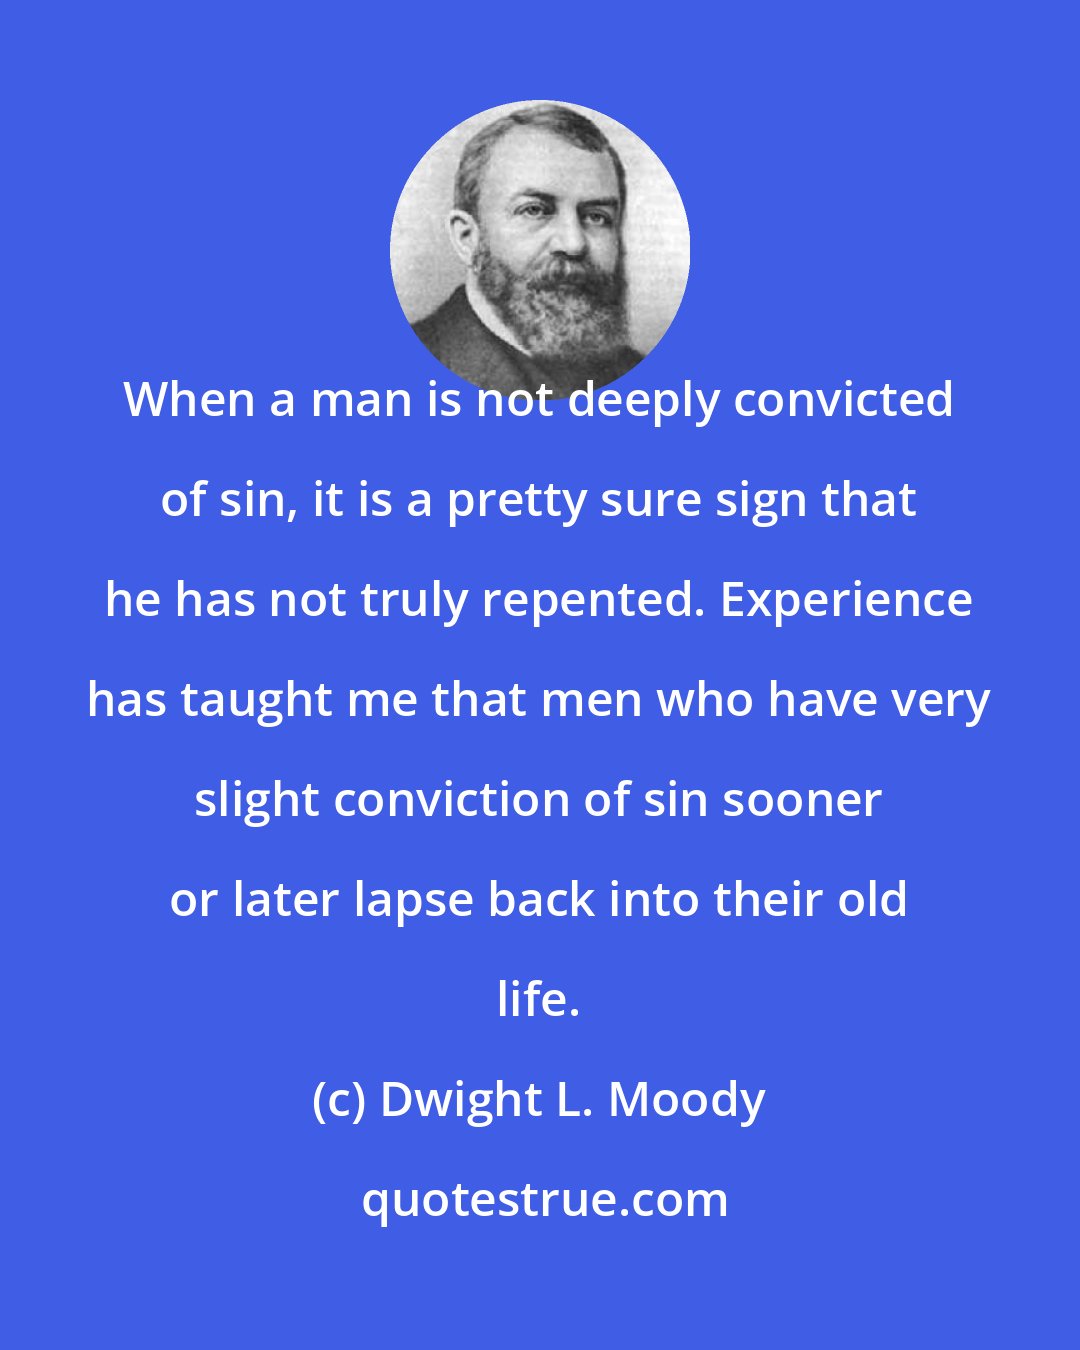 Dwight L. Moody: When a man is not deeply convicted of sin, it is a pretty sure sign that he has not truly repented. Experience has taught me that men who have very slight conviction of sin sooner or later lapse back into their old life.